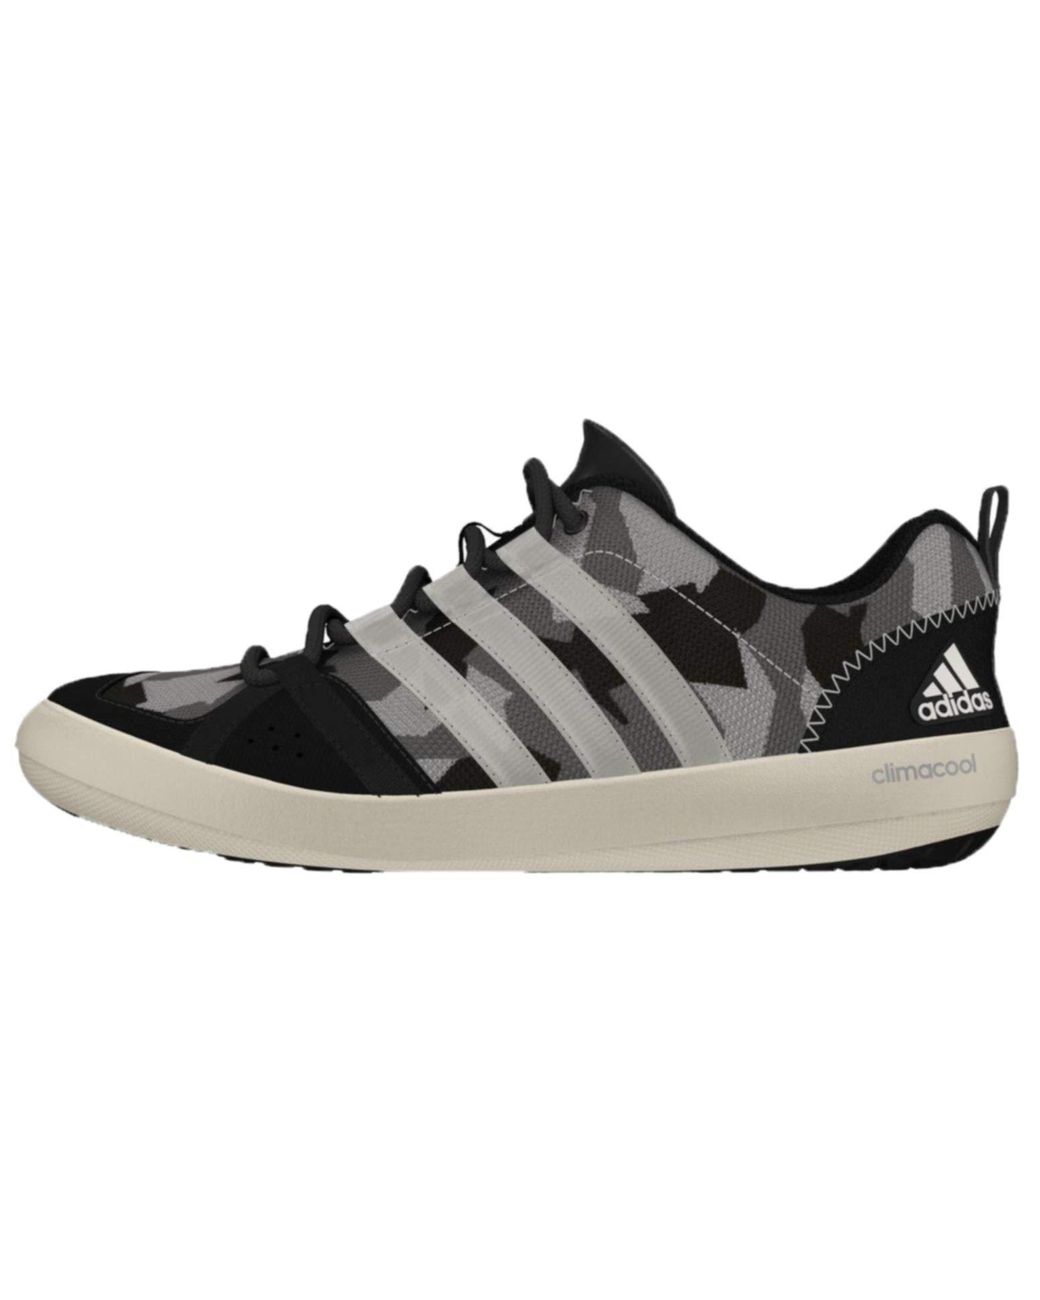 adidas Climacool Boat Lace Shoes in Black | Lyst UK